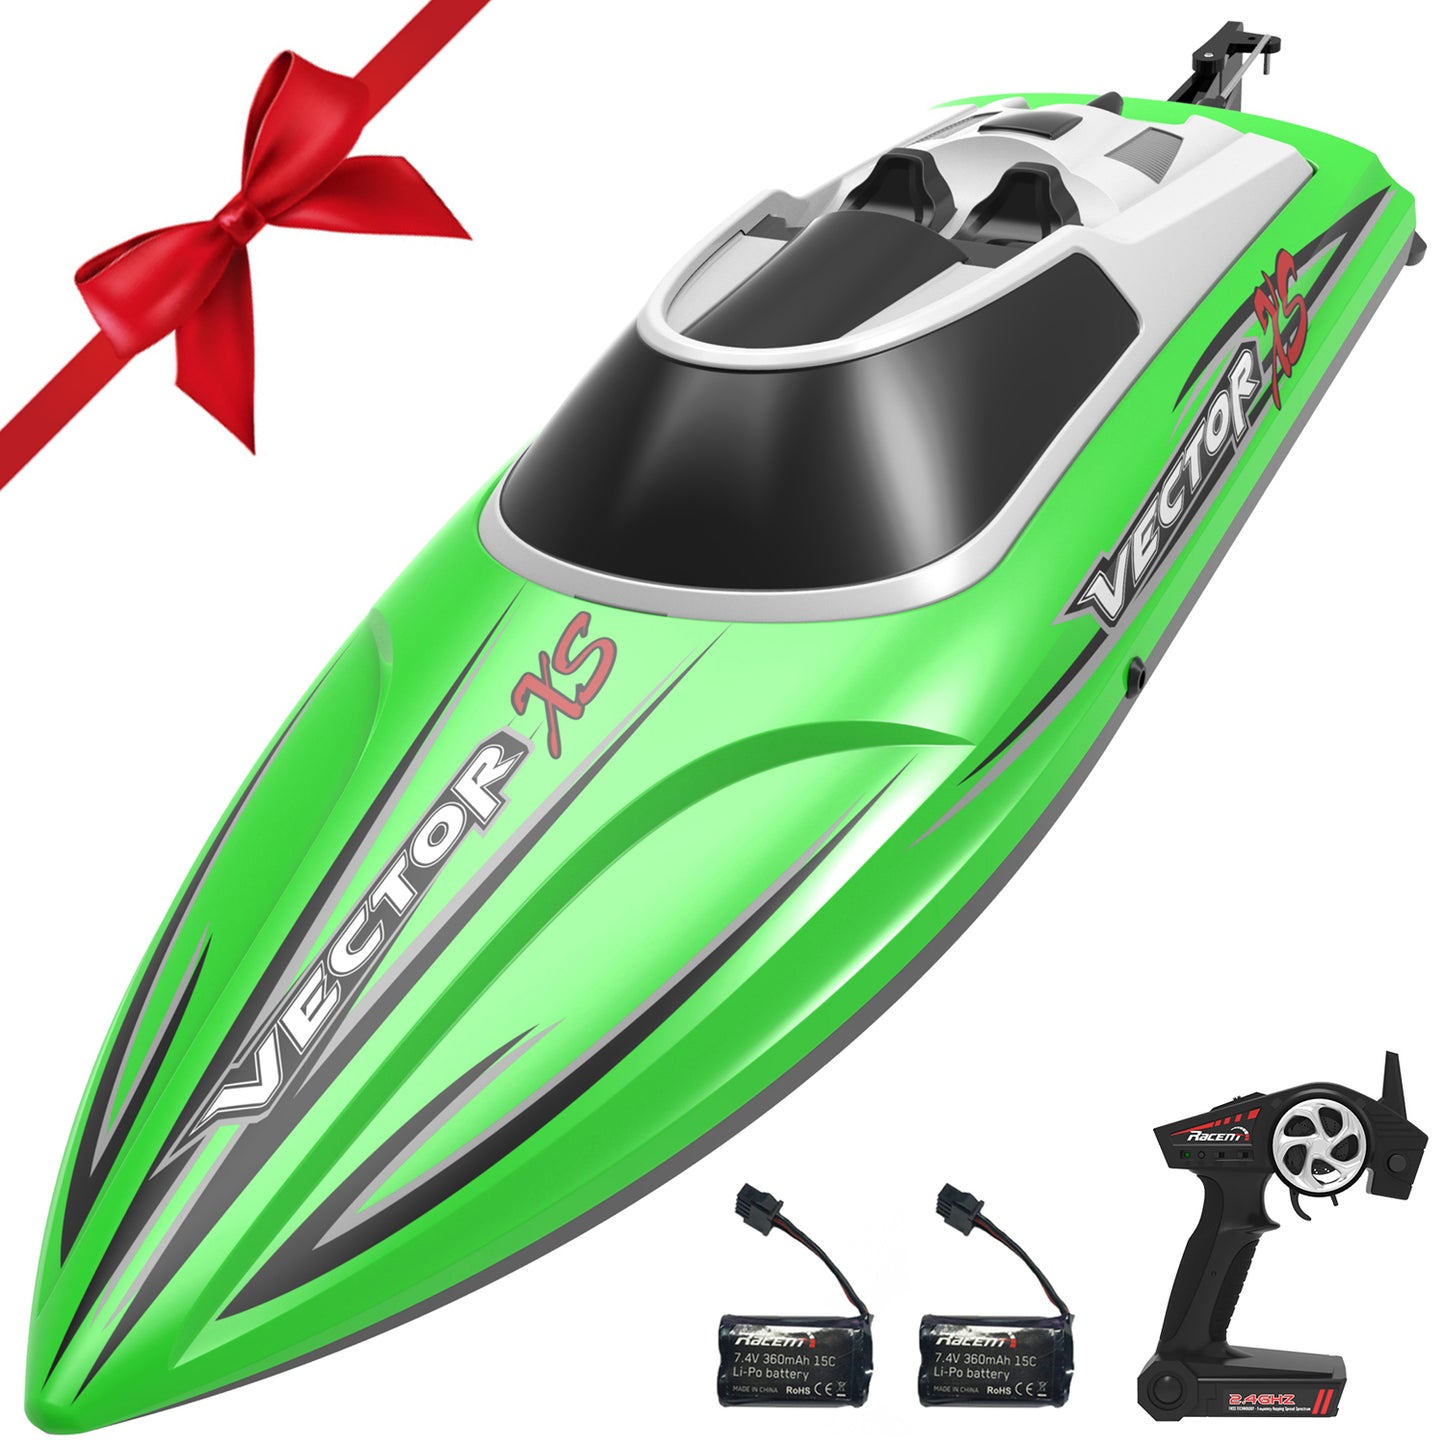 VOLANTEXRC RC Boat Remote Control Boat for Pools and Lakes 2.4Ghz 20MPH RC Boats for Kids Fast RC Racing Boat for Adults with 2 Rechargeable Batteries Toys Gifts for Boys Girls Green